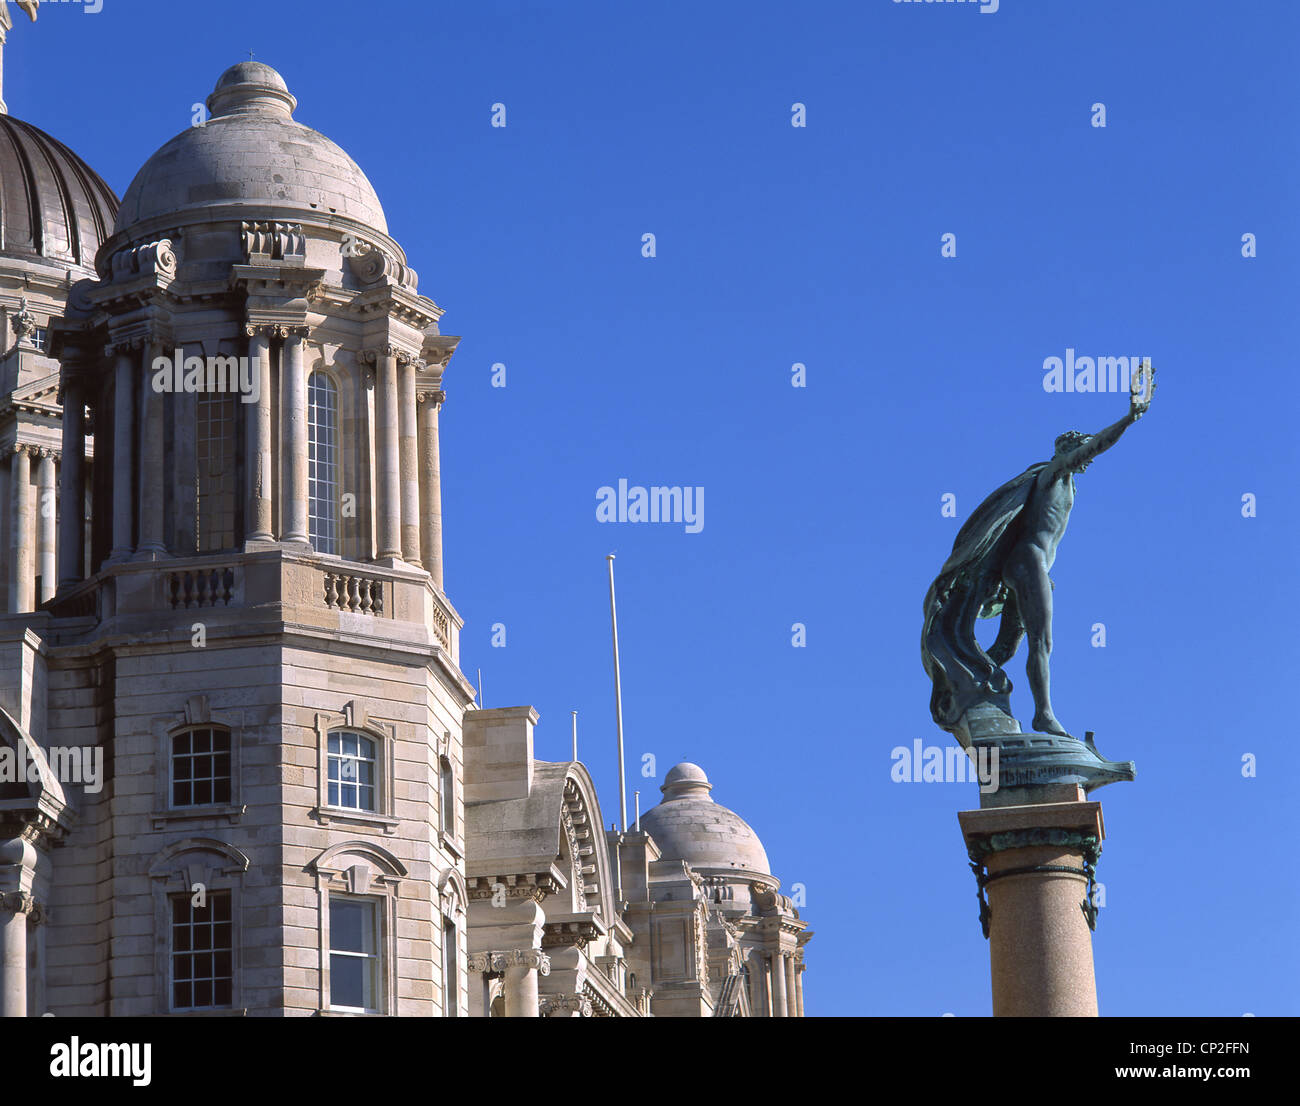 Port of Liverpool Building and War Memorial statue on Liverpool Pier Head, Liverpool, Merseyside, England, United Kingdom Stock Photo